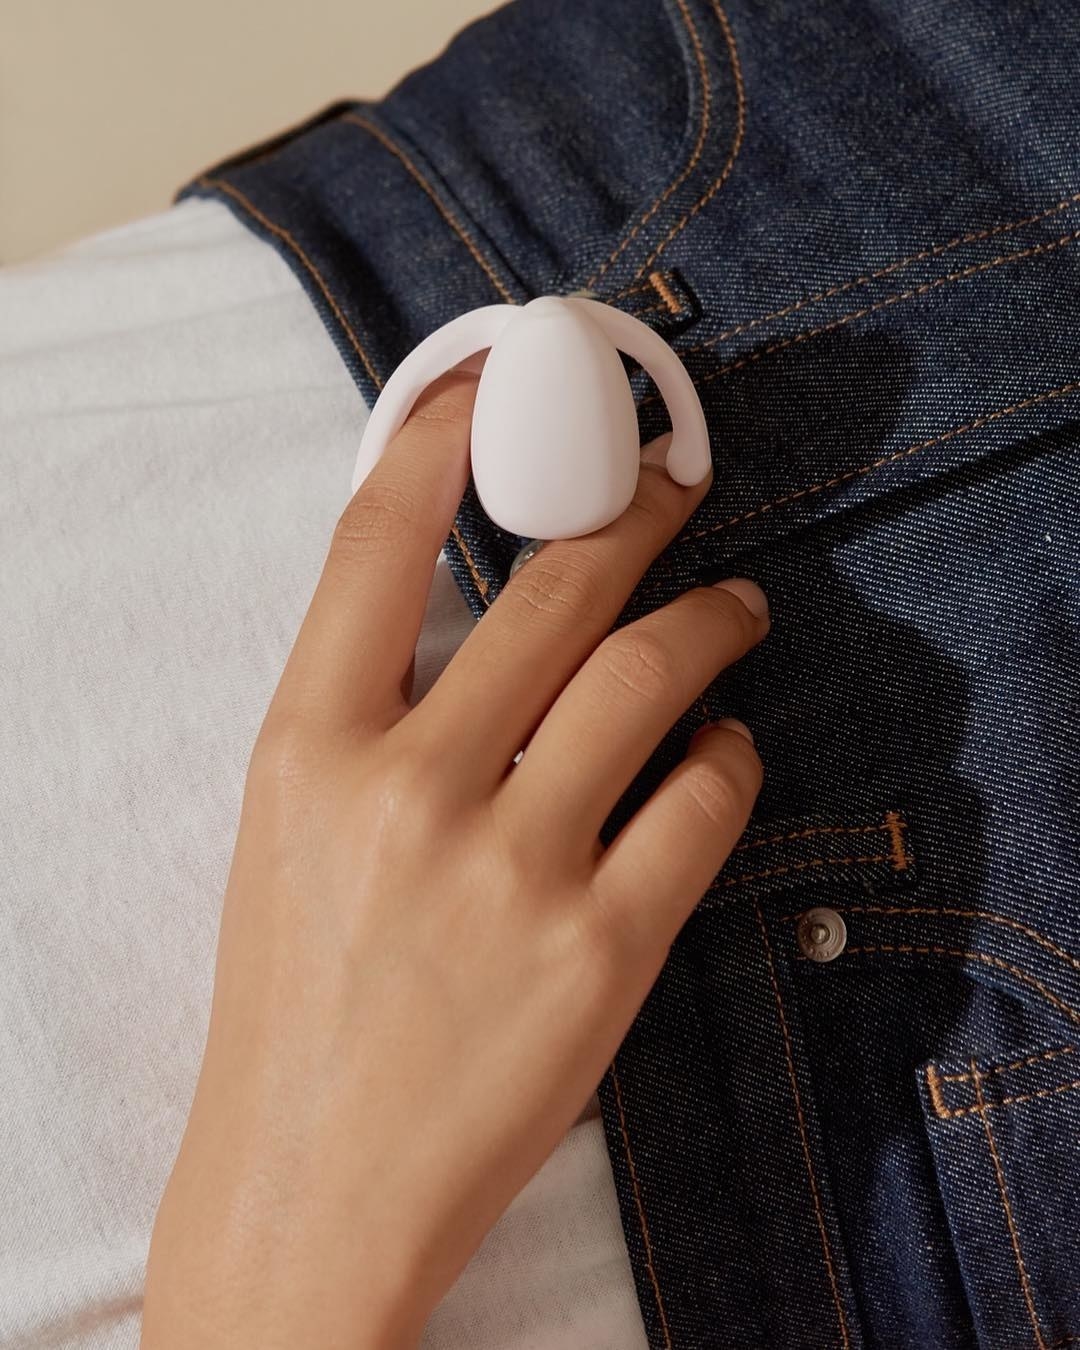 A person holding the vibrator against their jeans